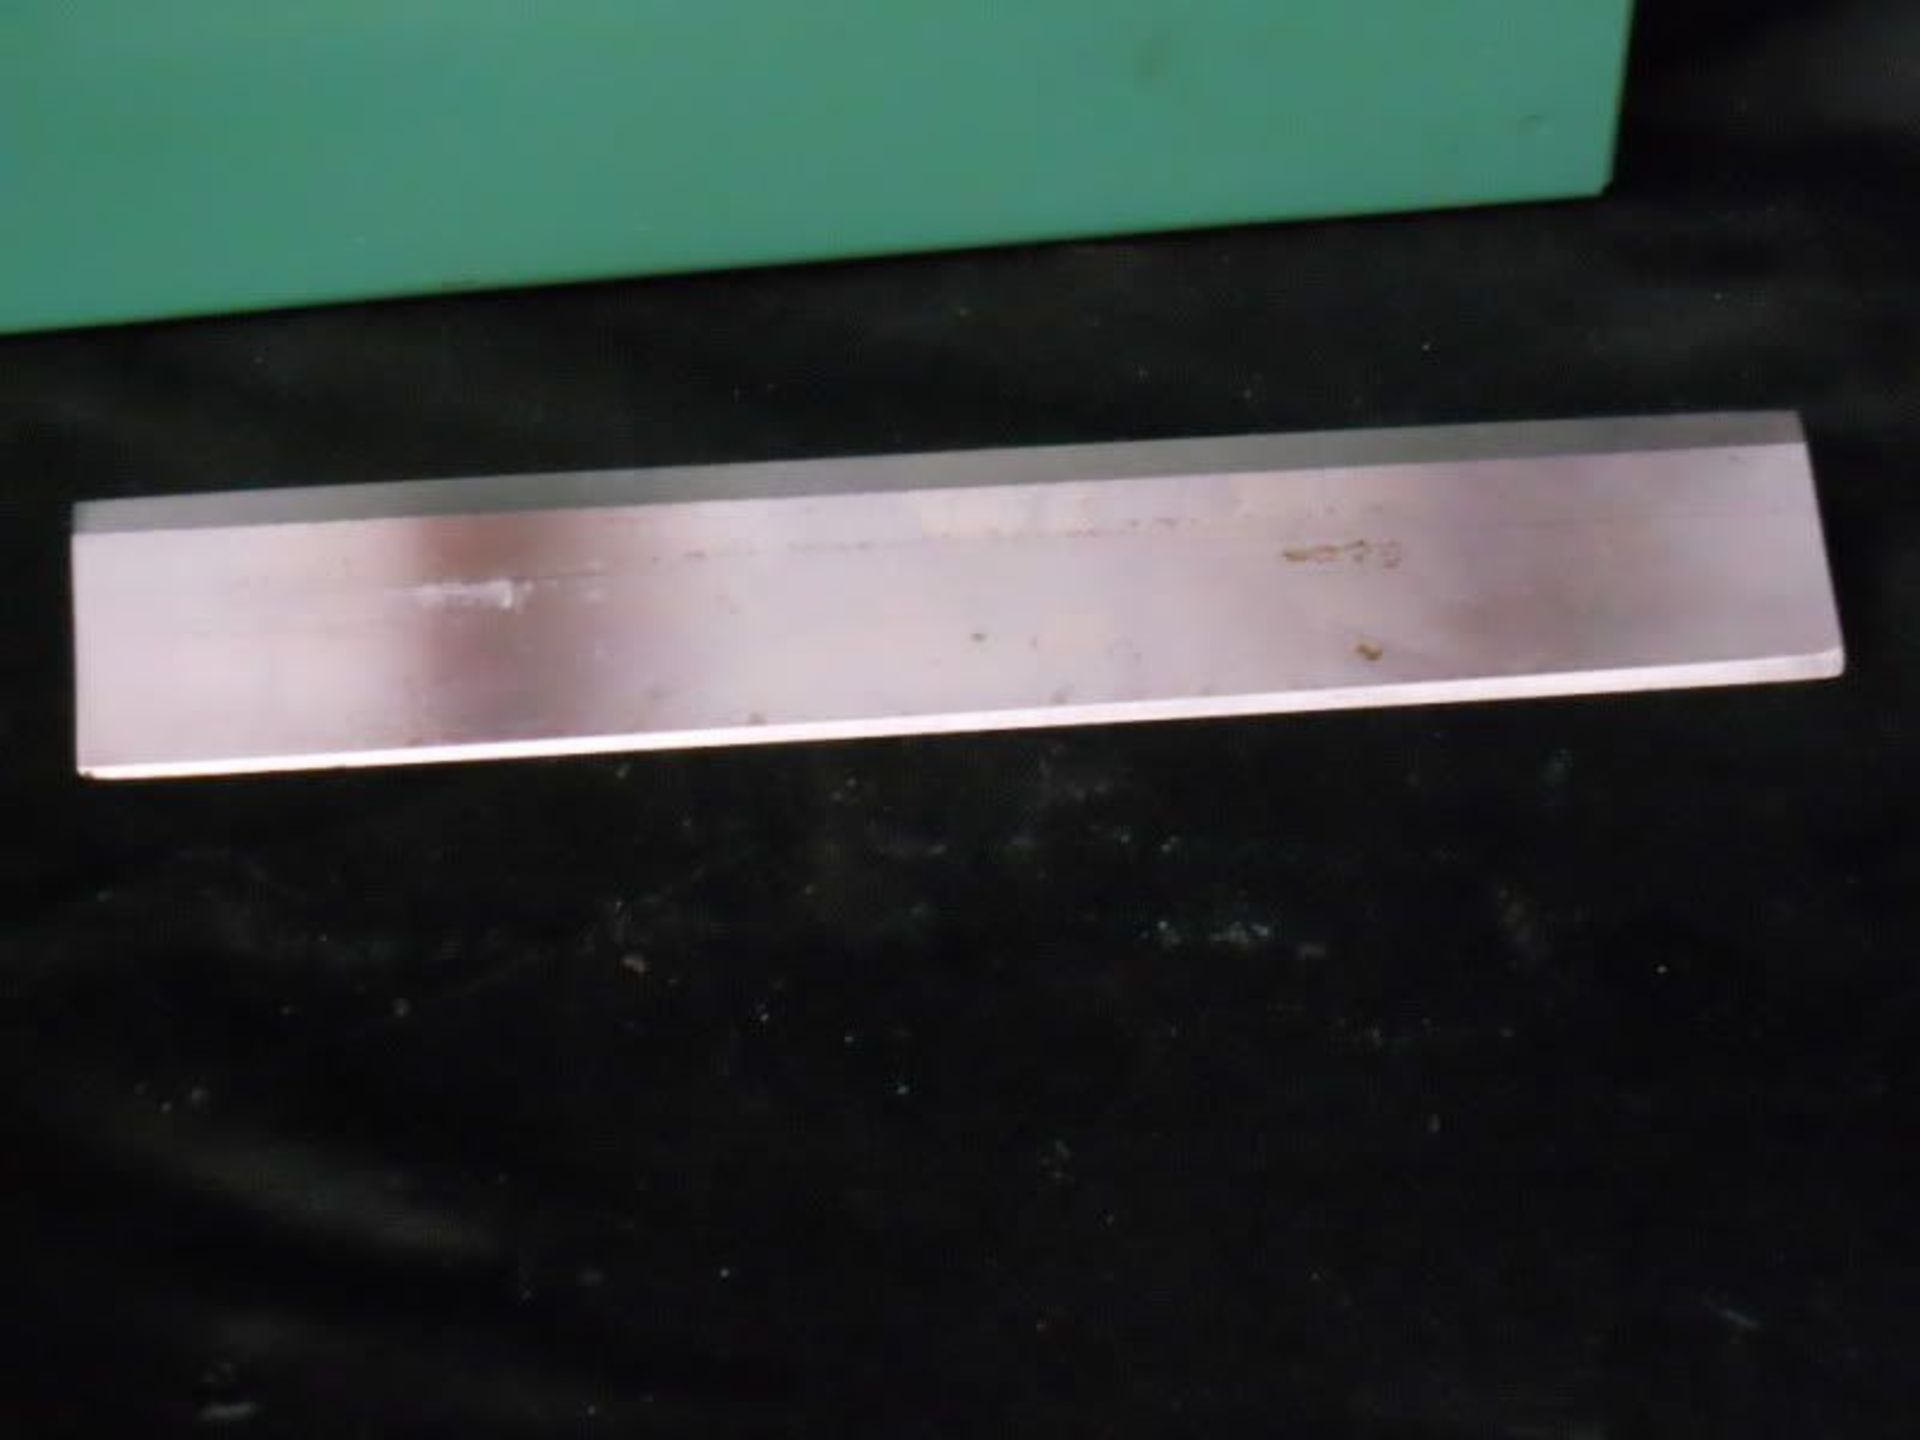 Lipshaw Microtome Knife Blade 185mm FF5547, Qty 1, 221081040509 - Image 5 of 6